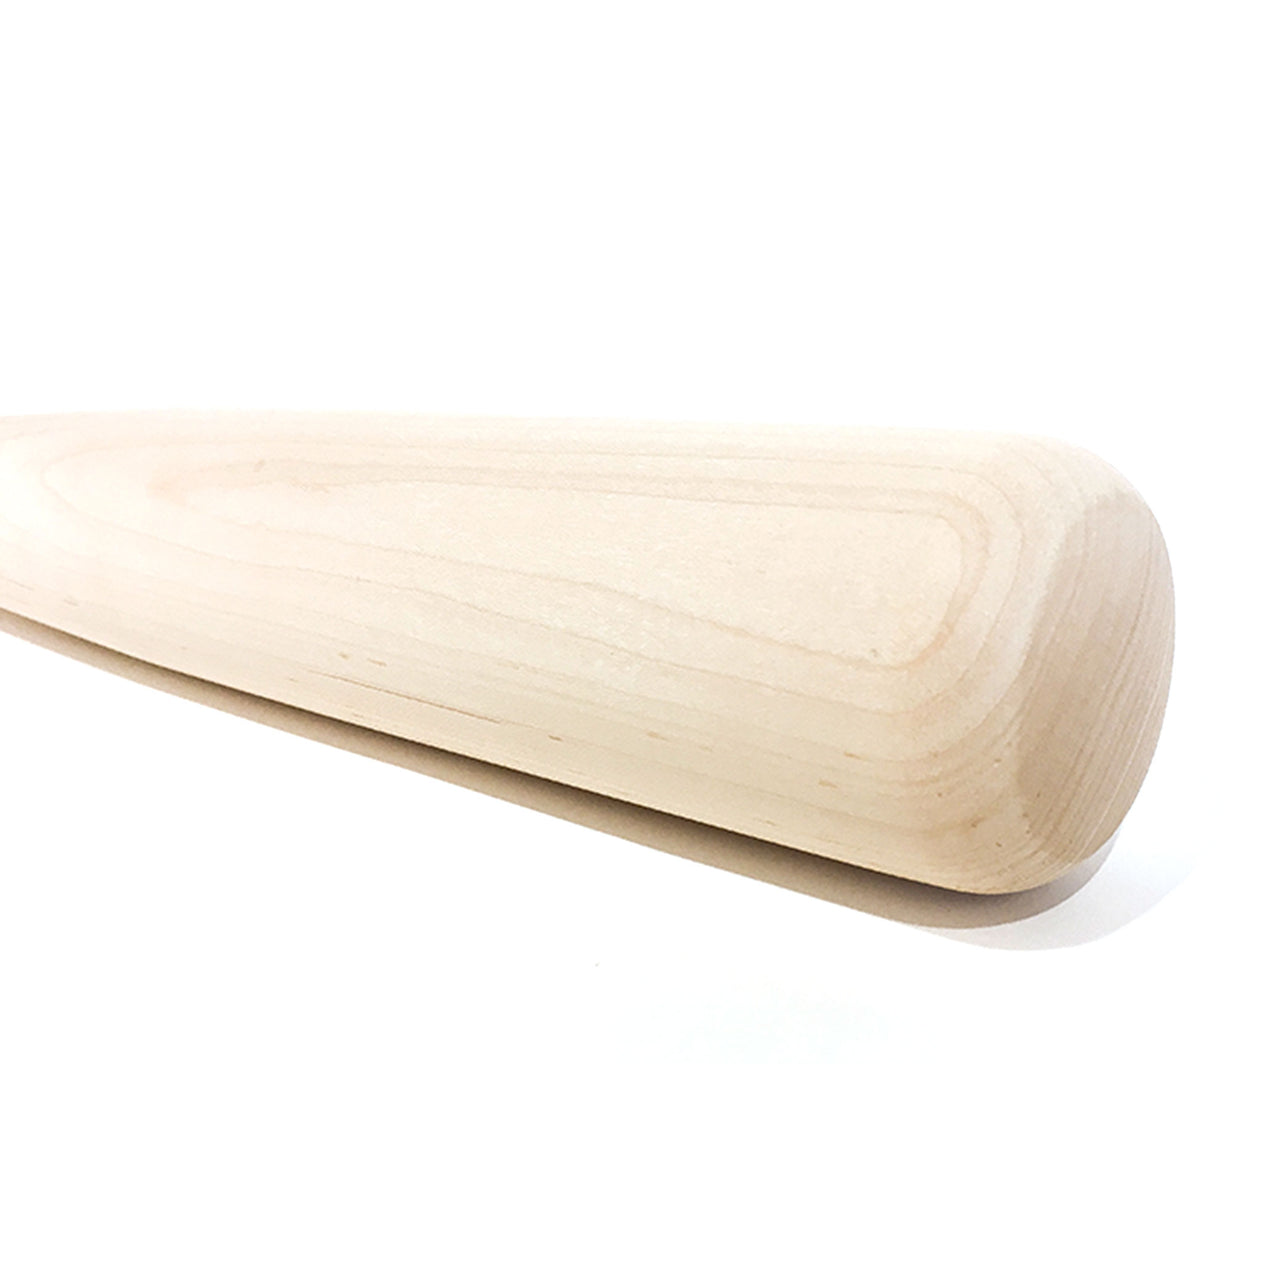 TWBF Trophy Bat Natural (uncoated) (Raw)